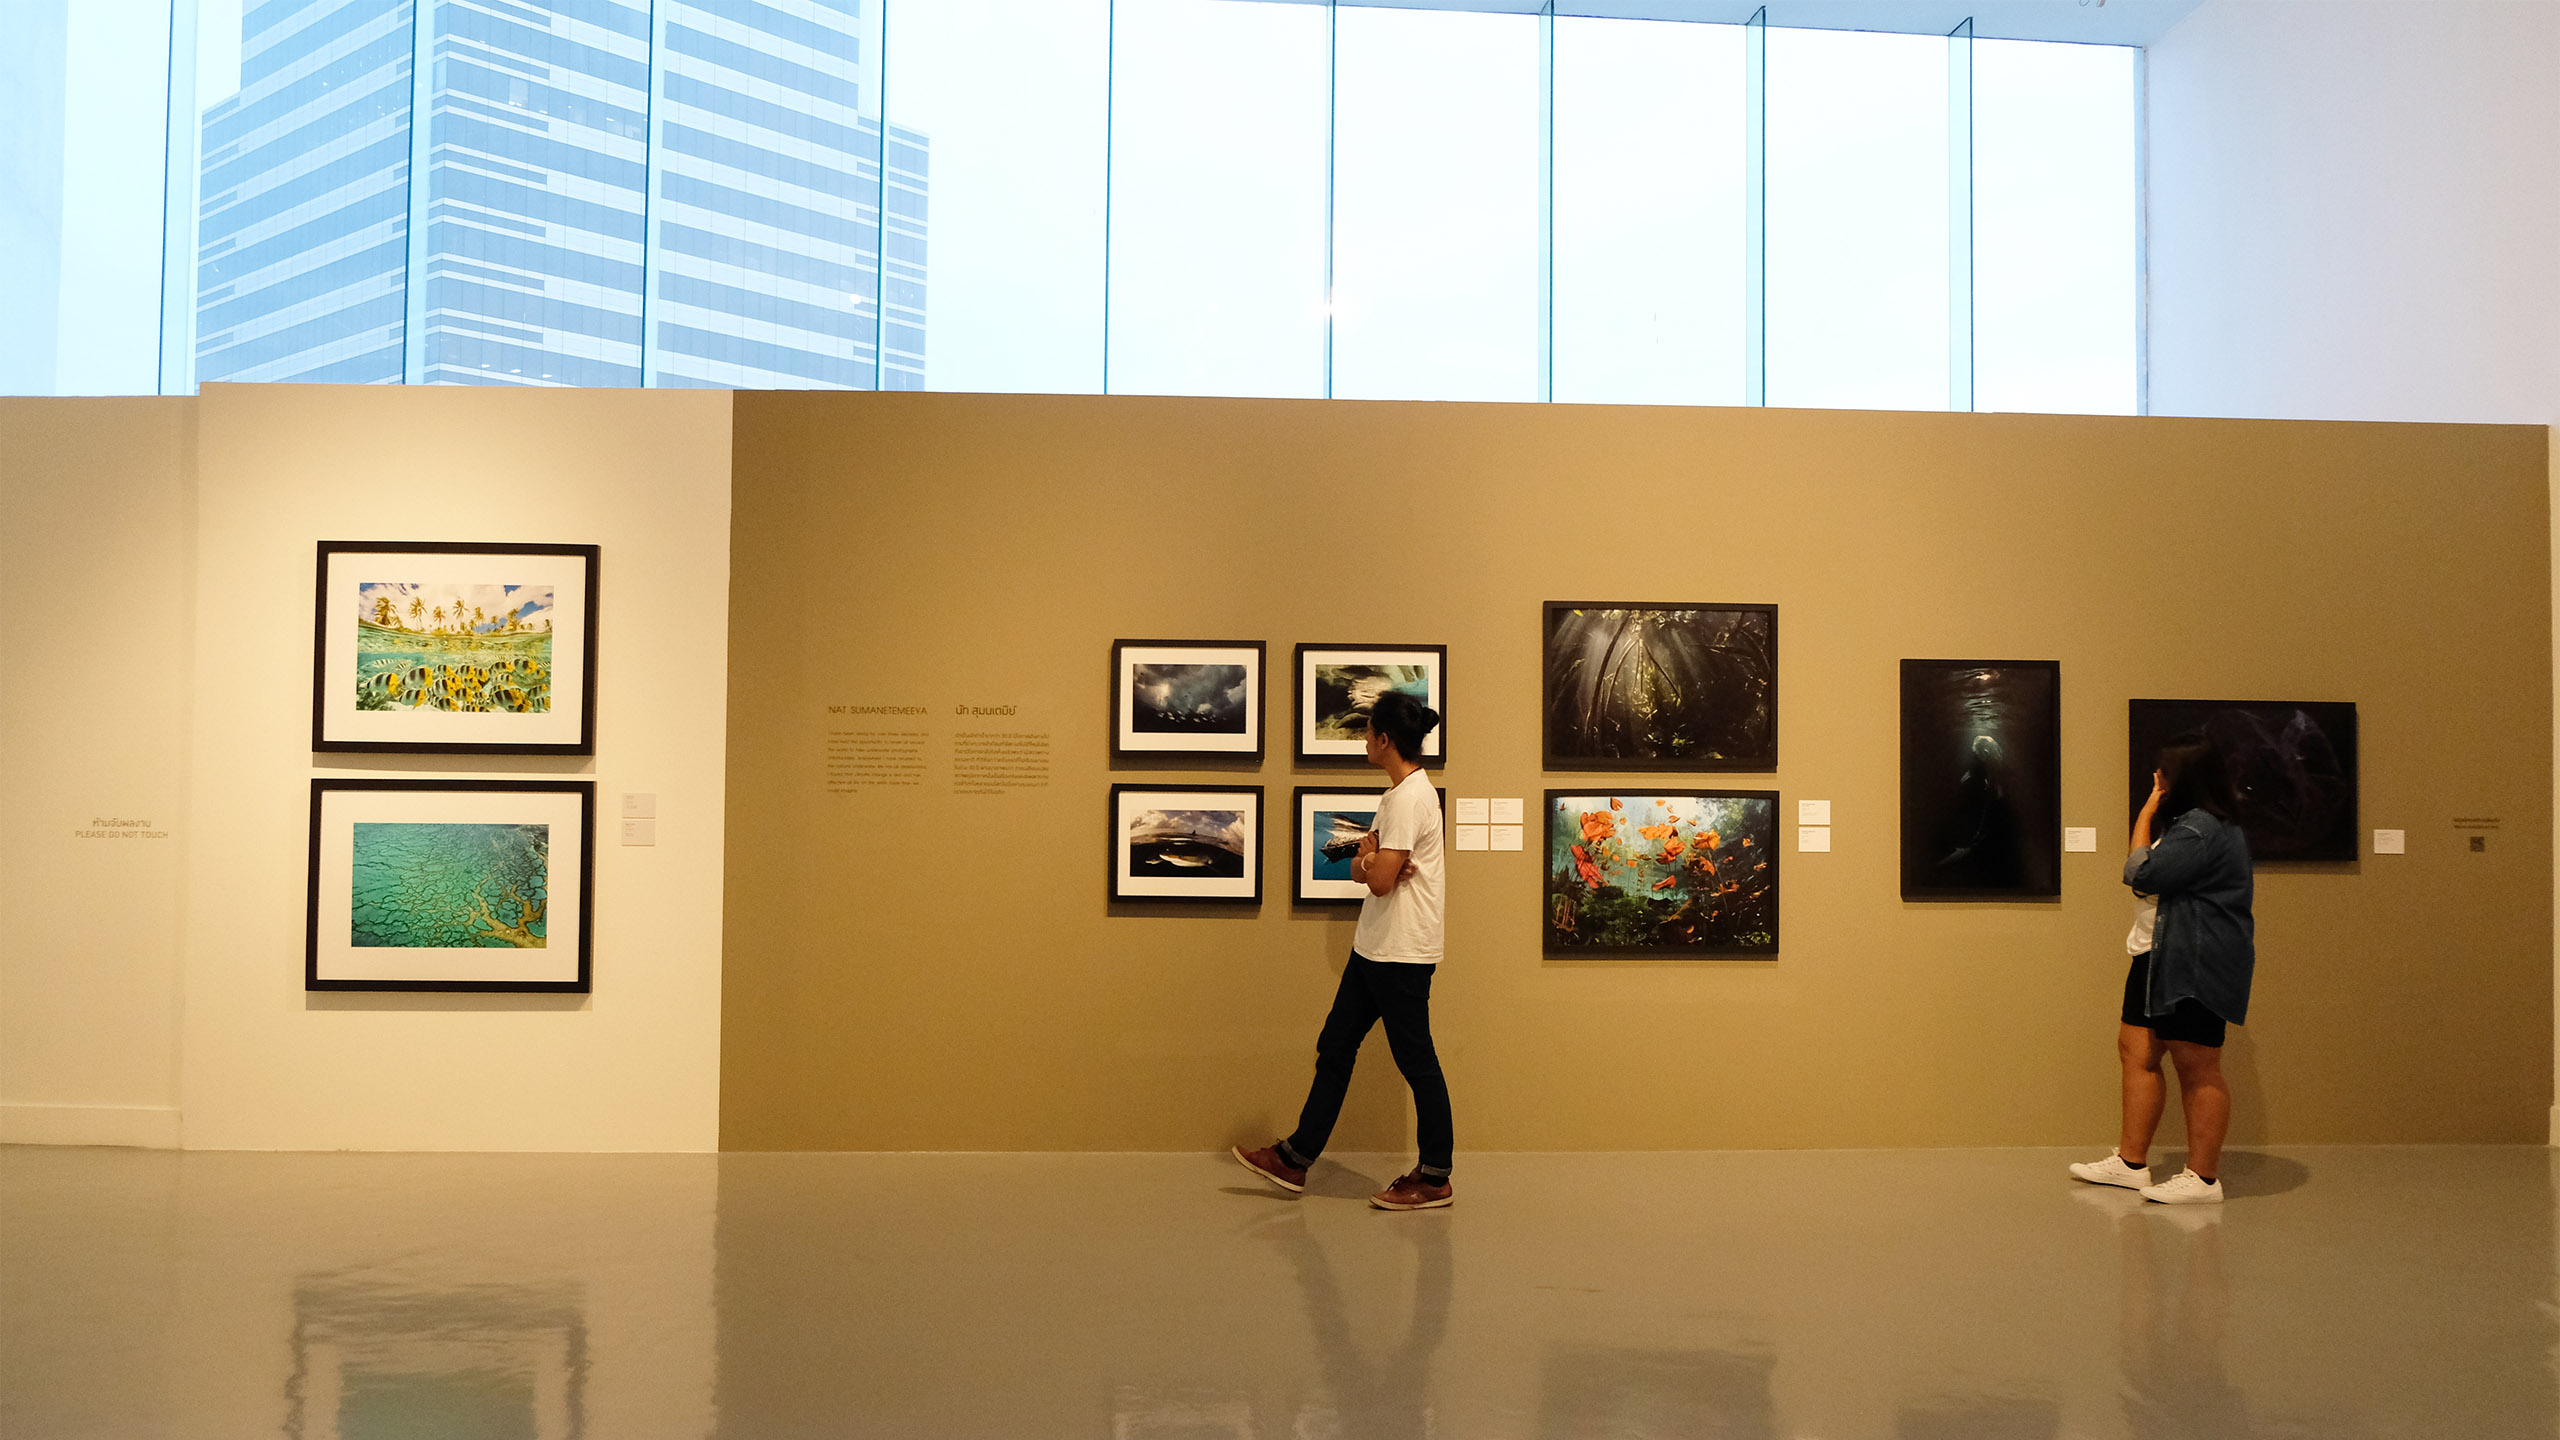 Exhibition Beyond the Air We Breathe: Addressing causes and effects of climate change | นิทรรศการภาพถ่าย